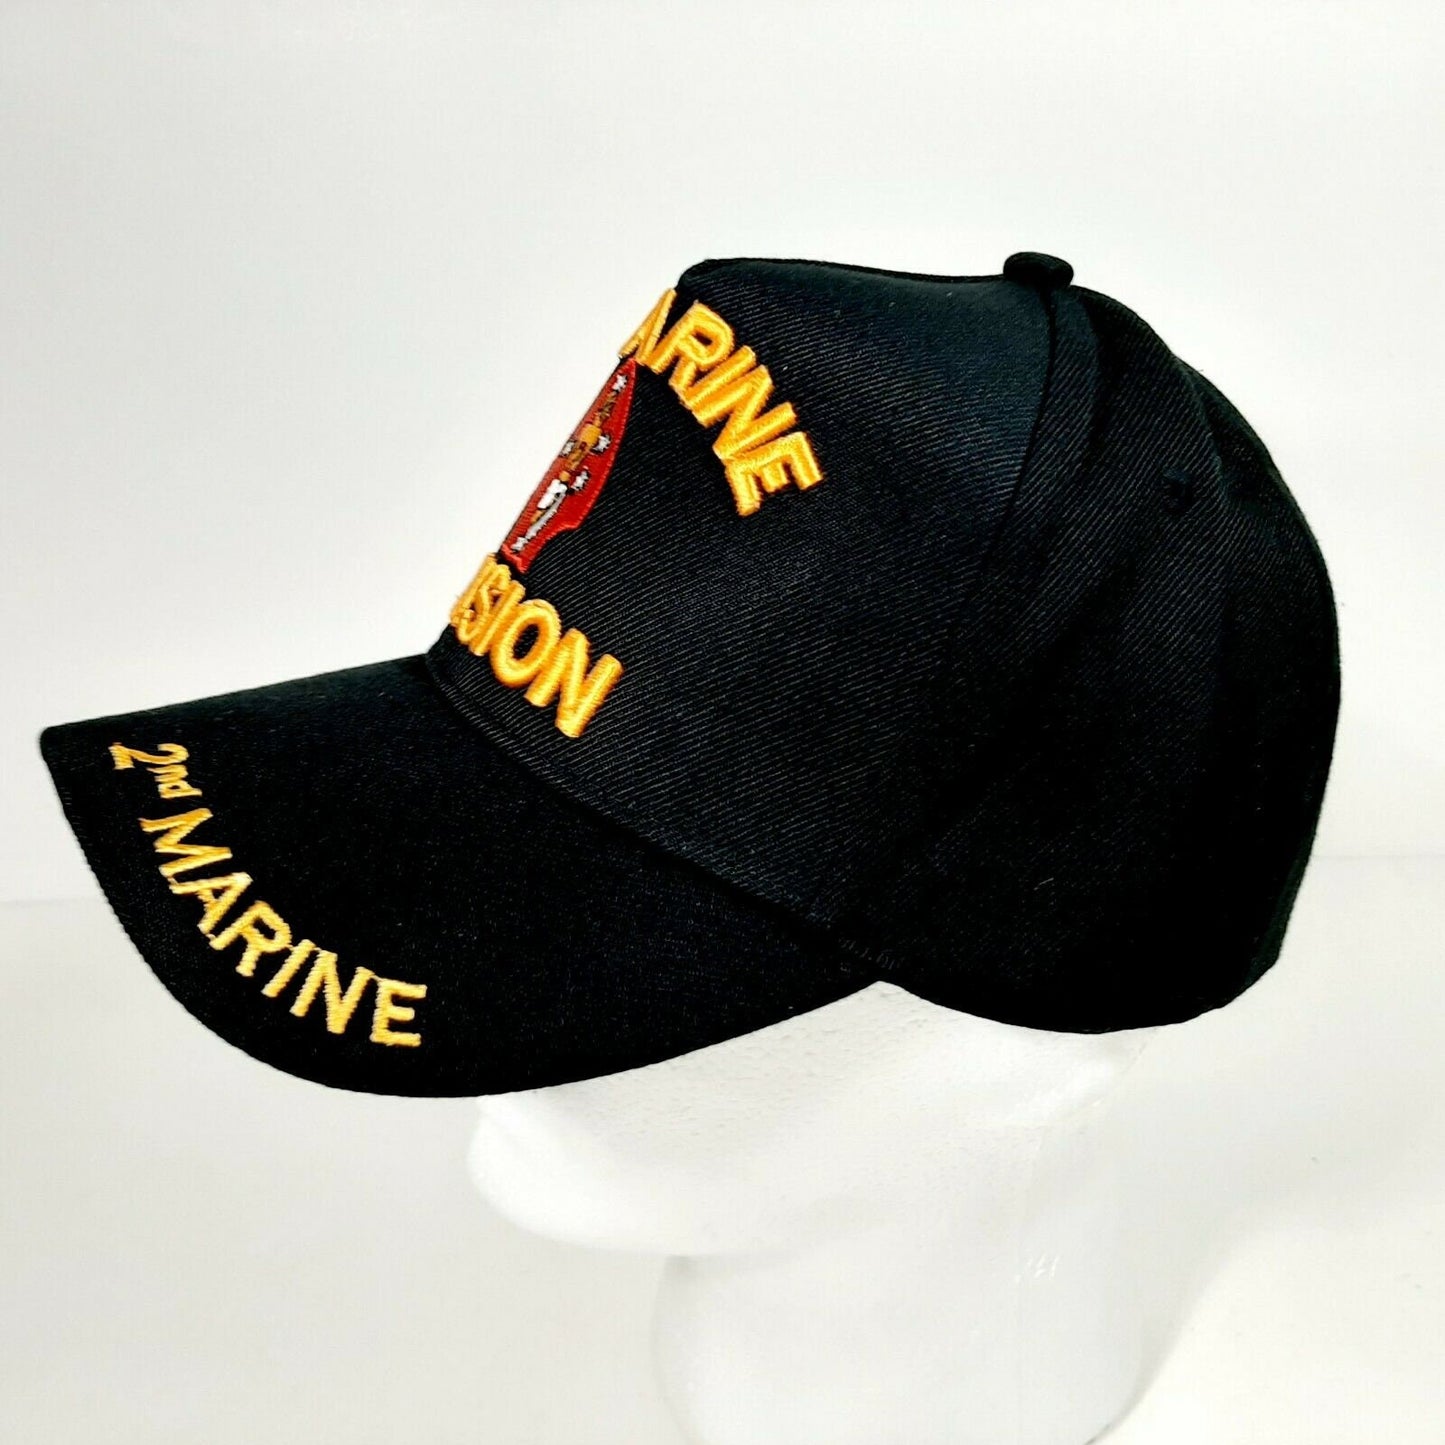 2nd Marine Division Men's Ball Cap Hat Black Embroidered Acrylic